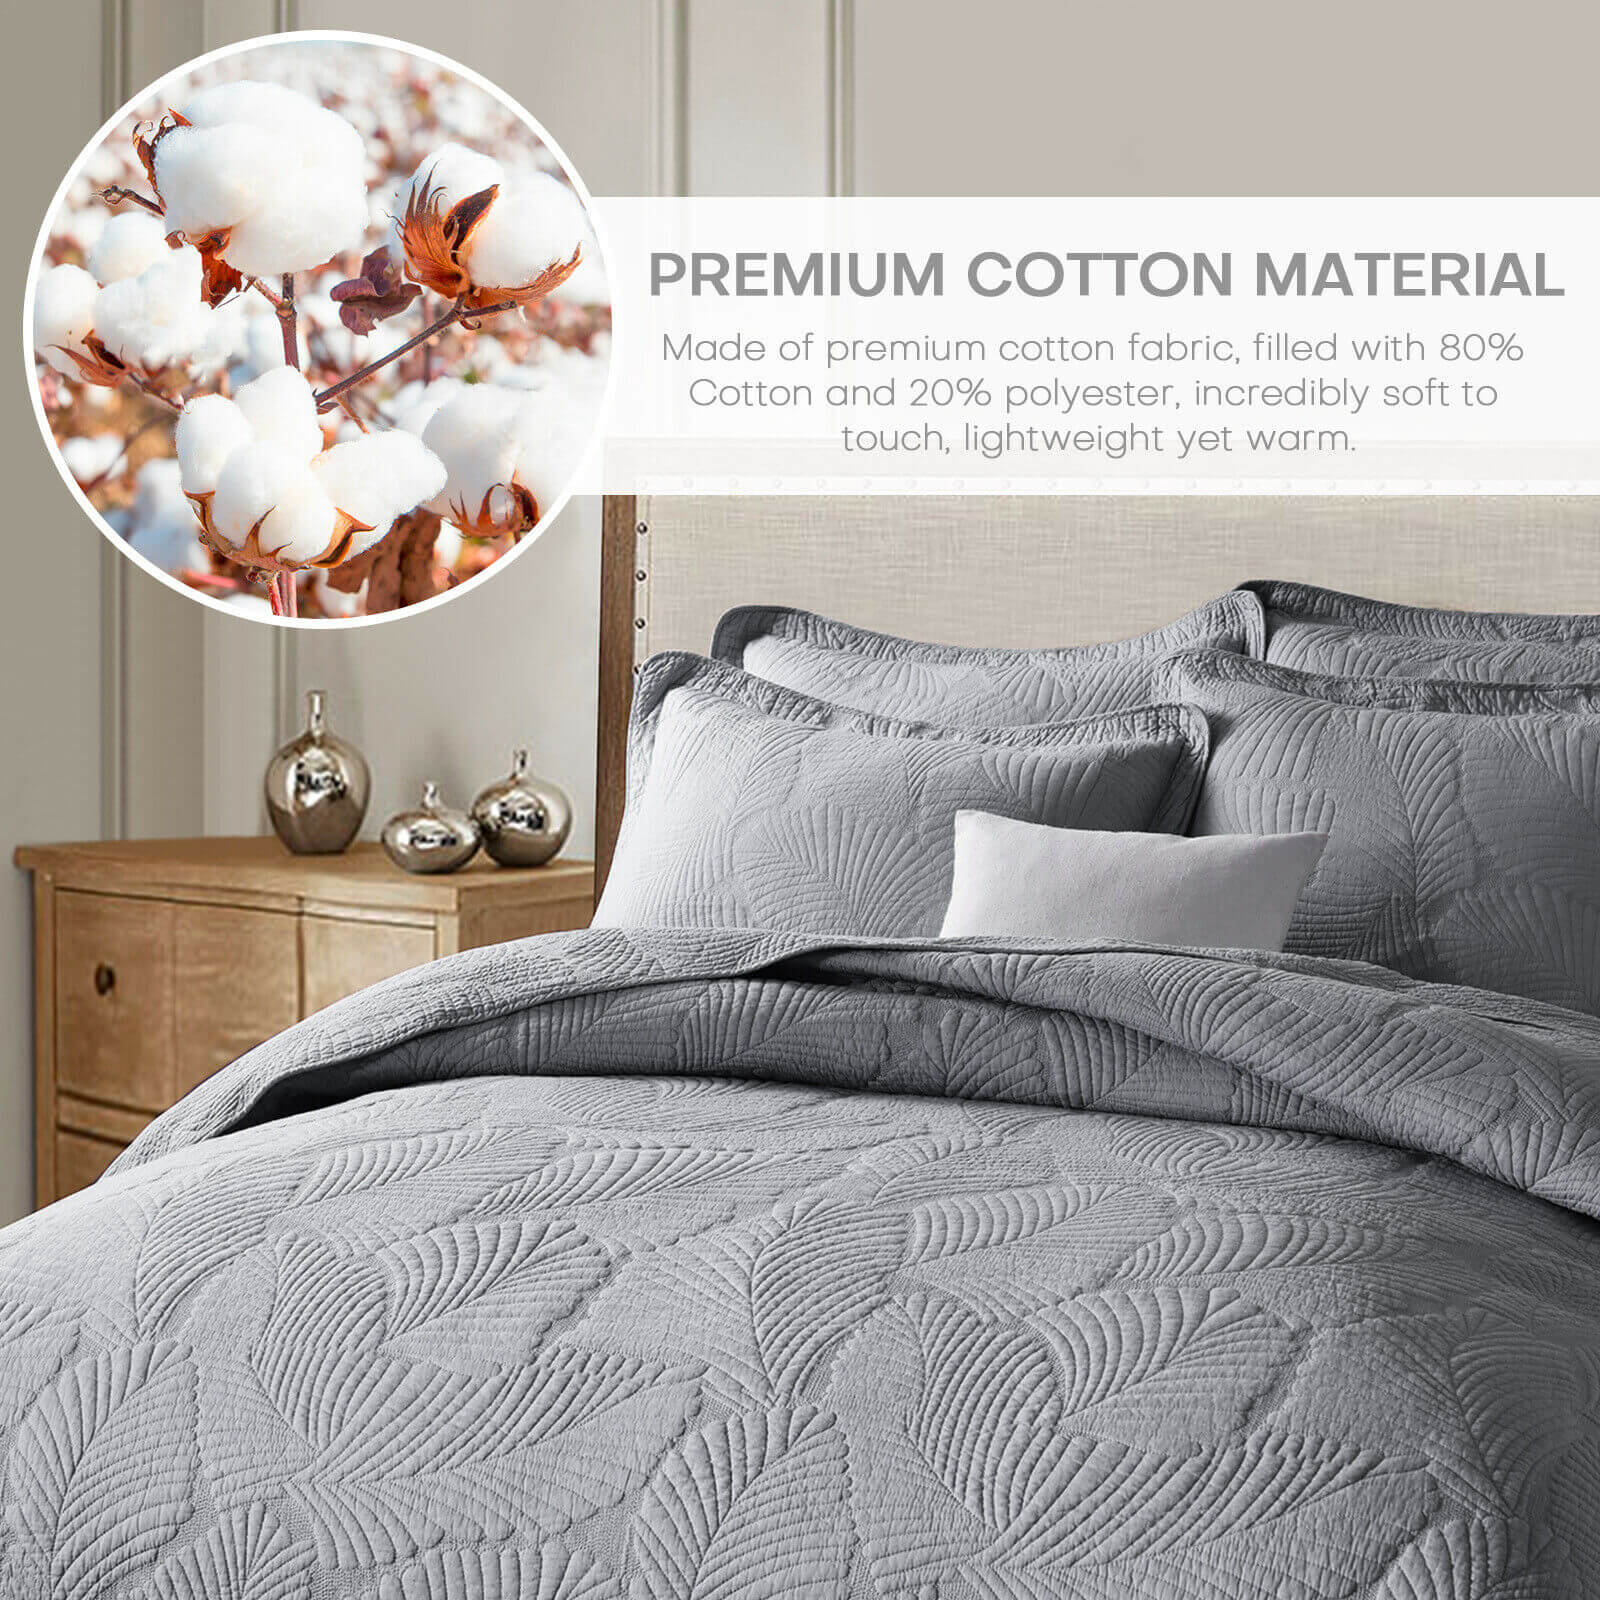 Material of the 3-piece quilt bedding set